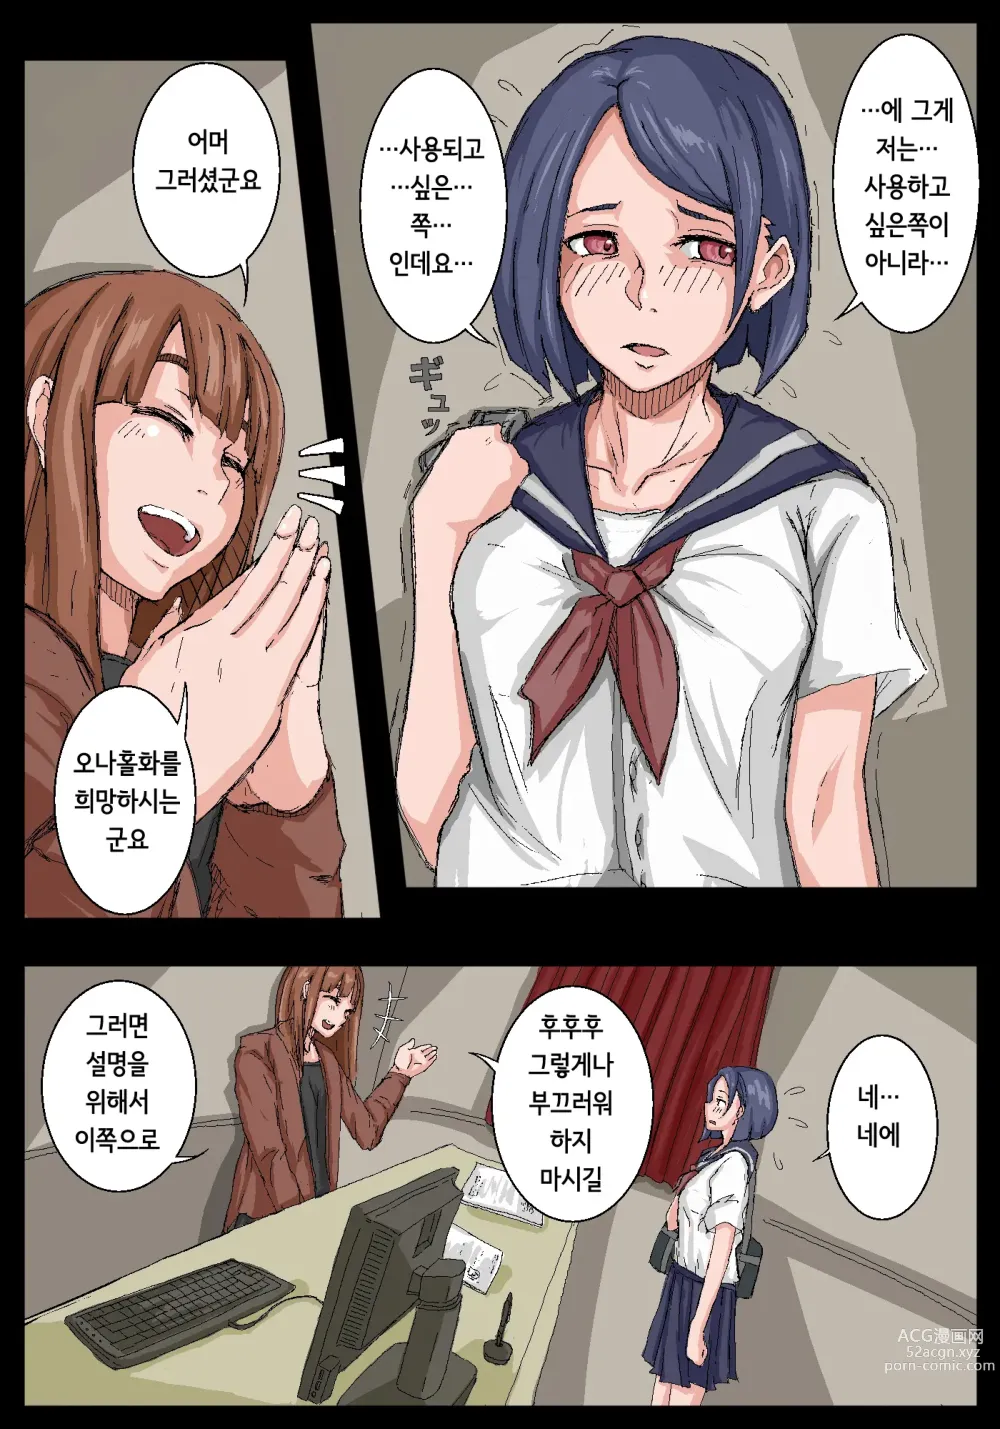 Page 6 of doujinshi 오나홀 선배